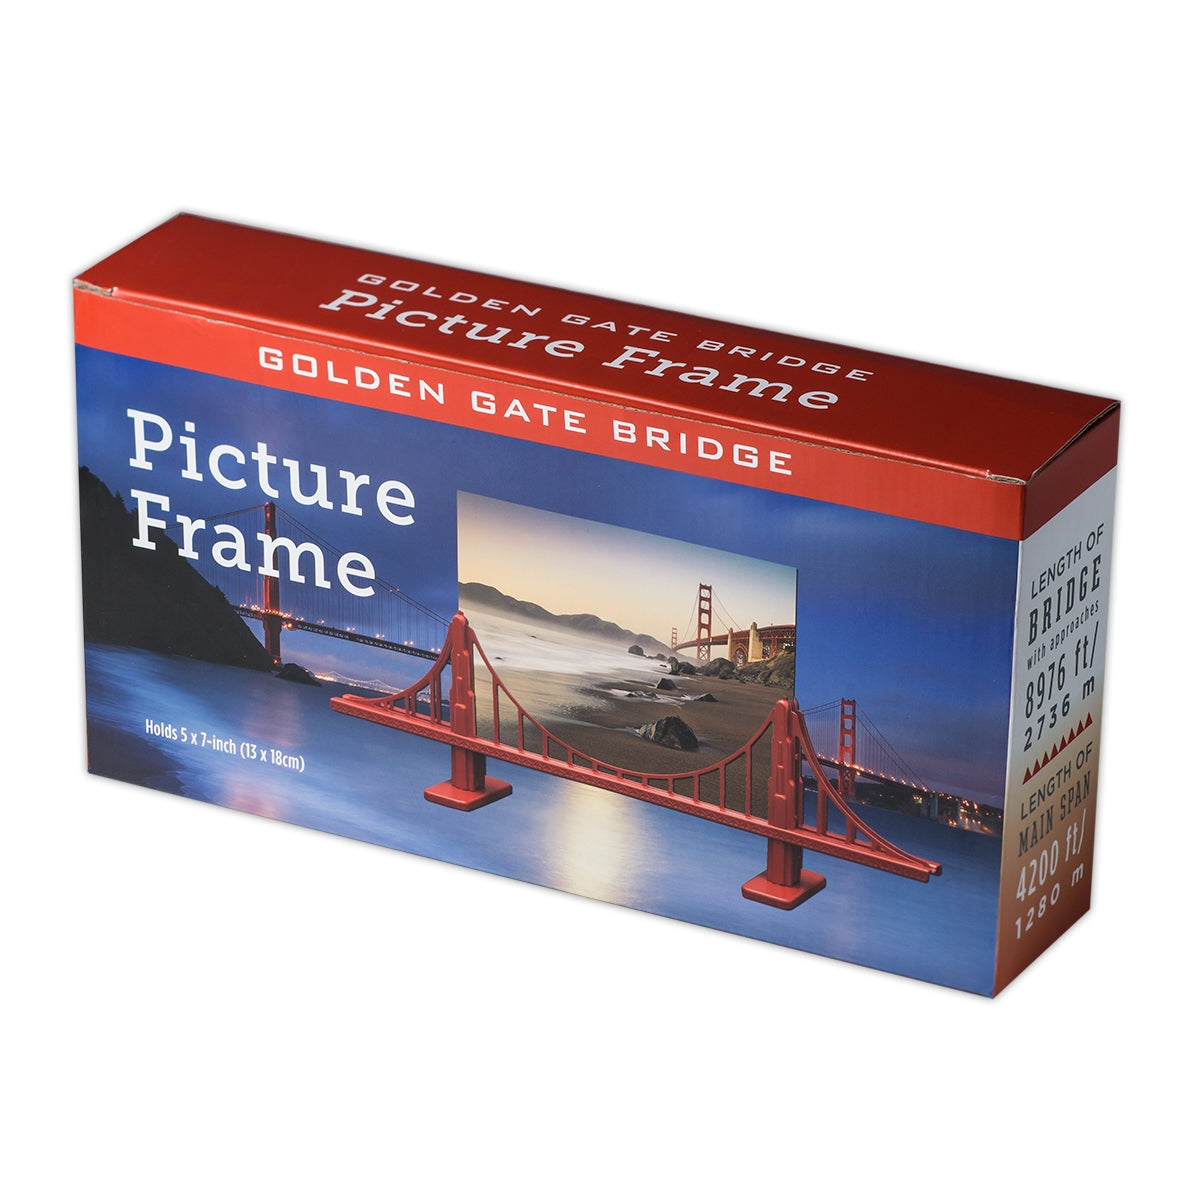 Colorful gift box for Golden Gate Bridge picture frame.